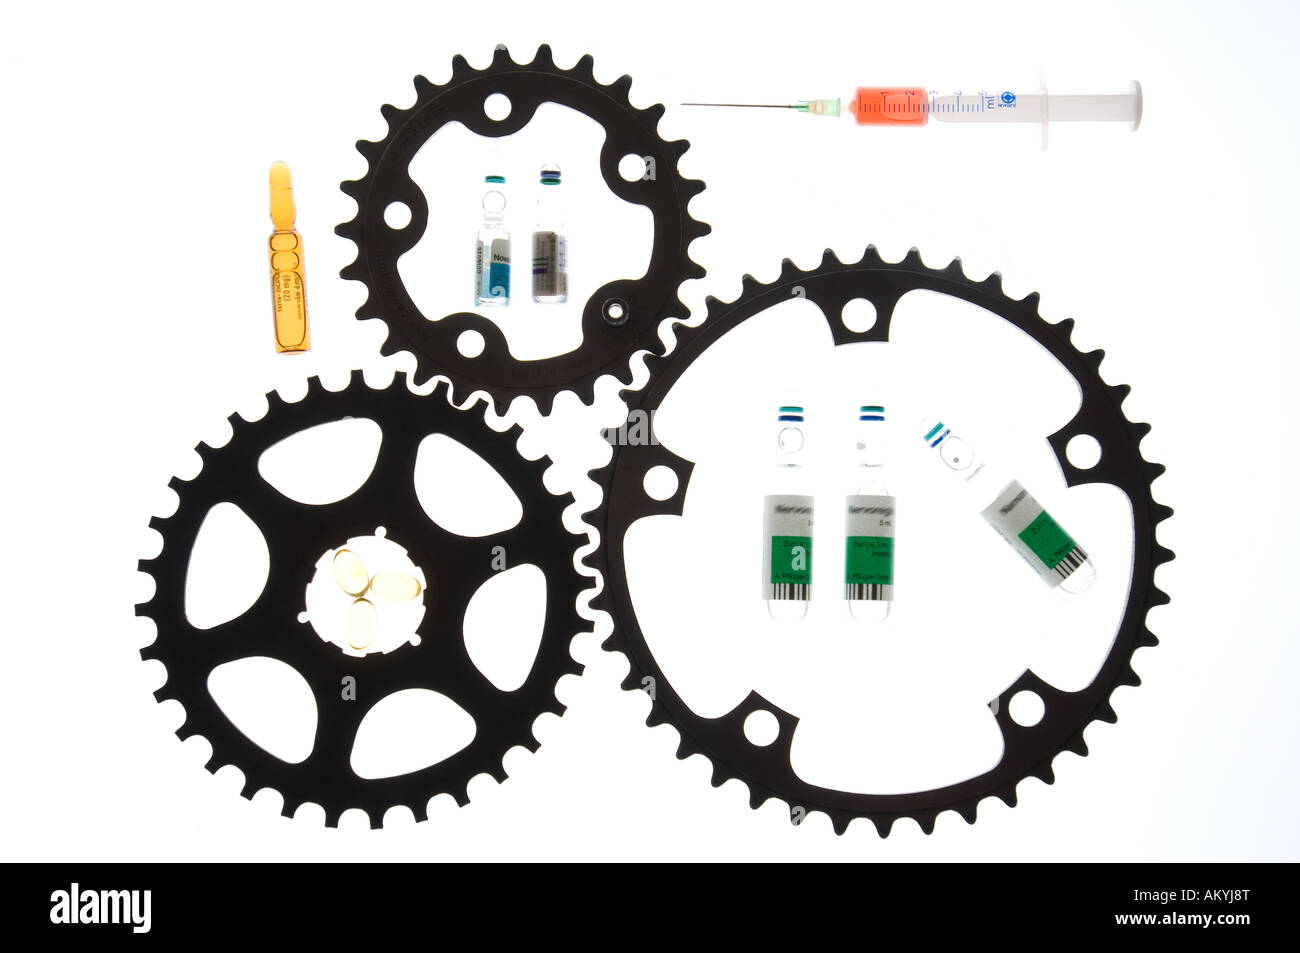 Gear wheels and medicines symbolize medicine abuse (doping) in the cycling. Stock Photo